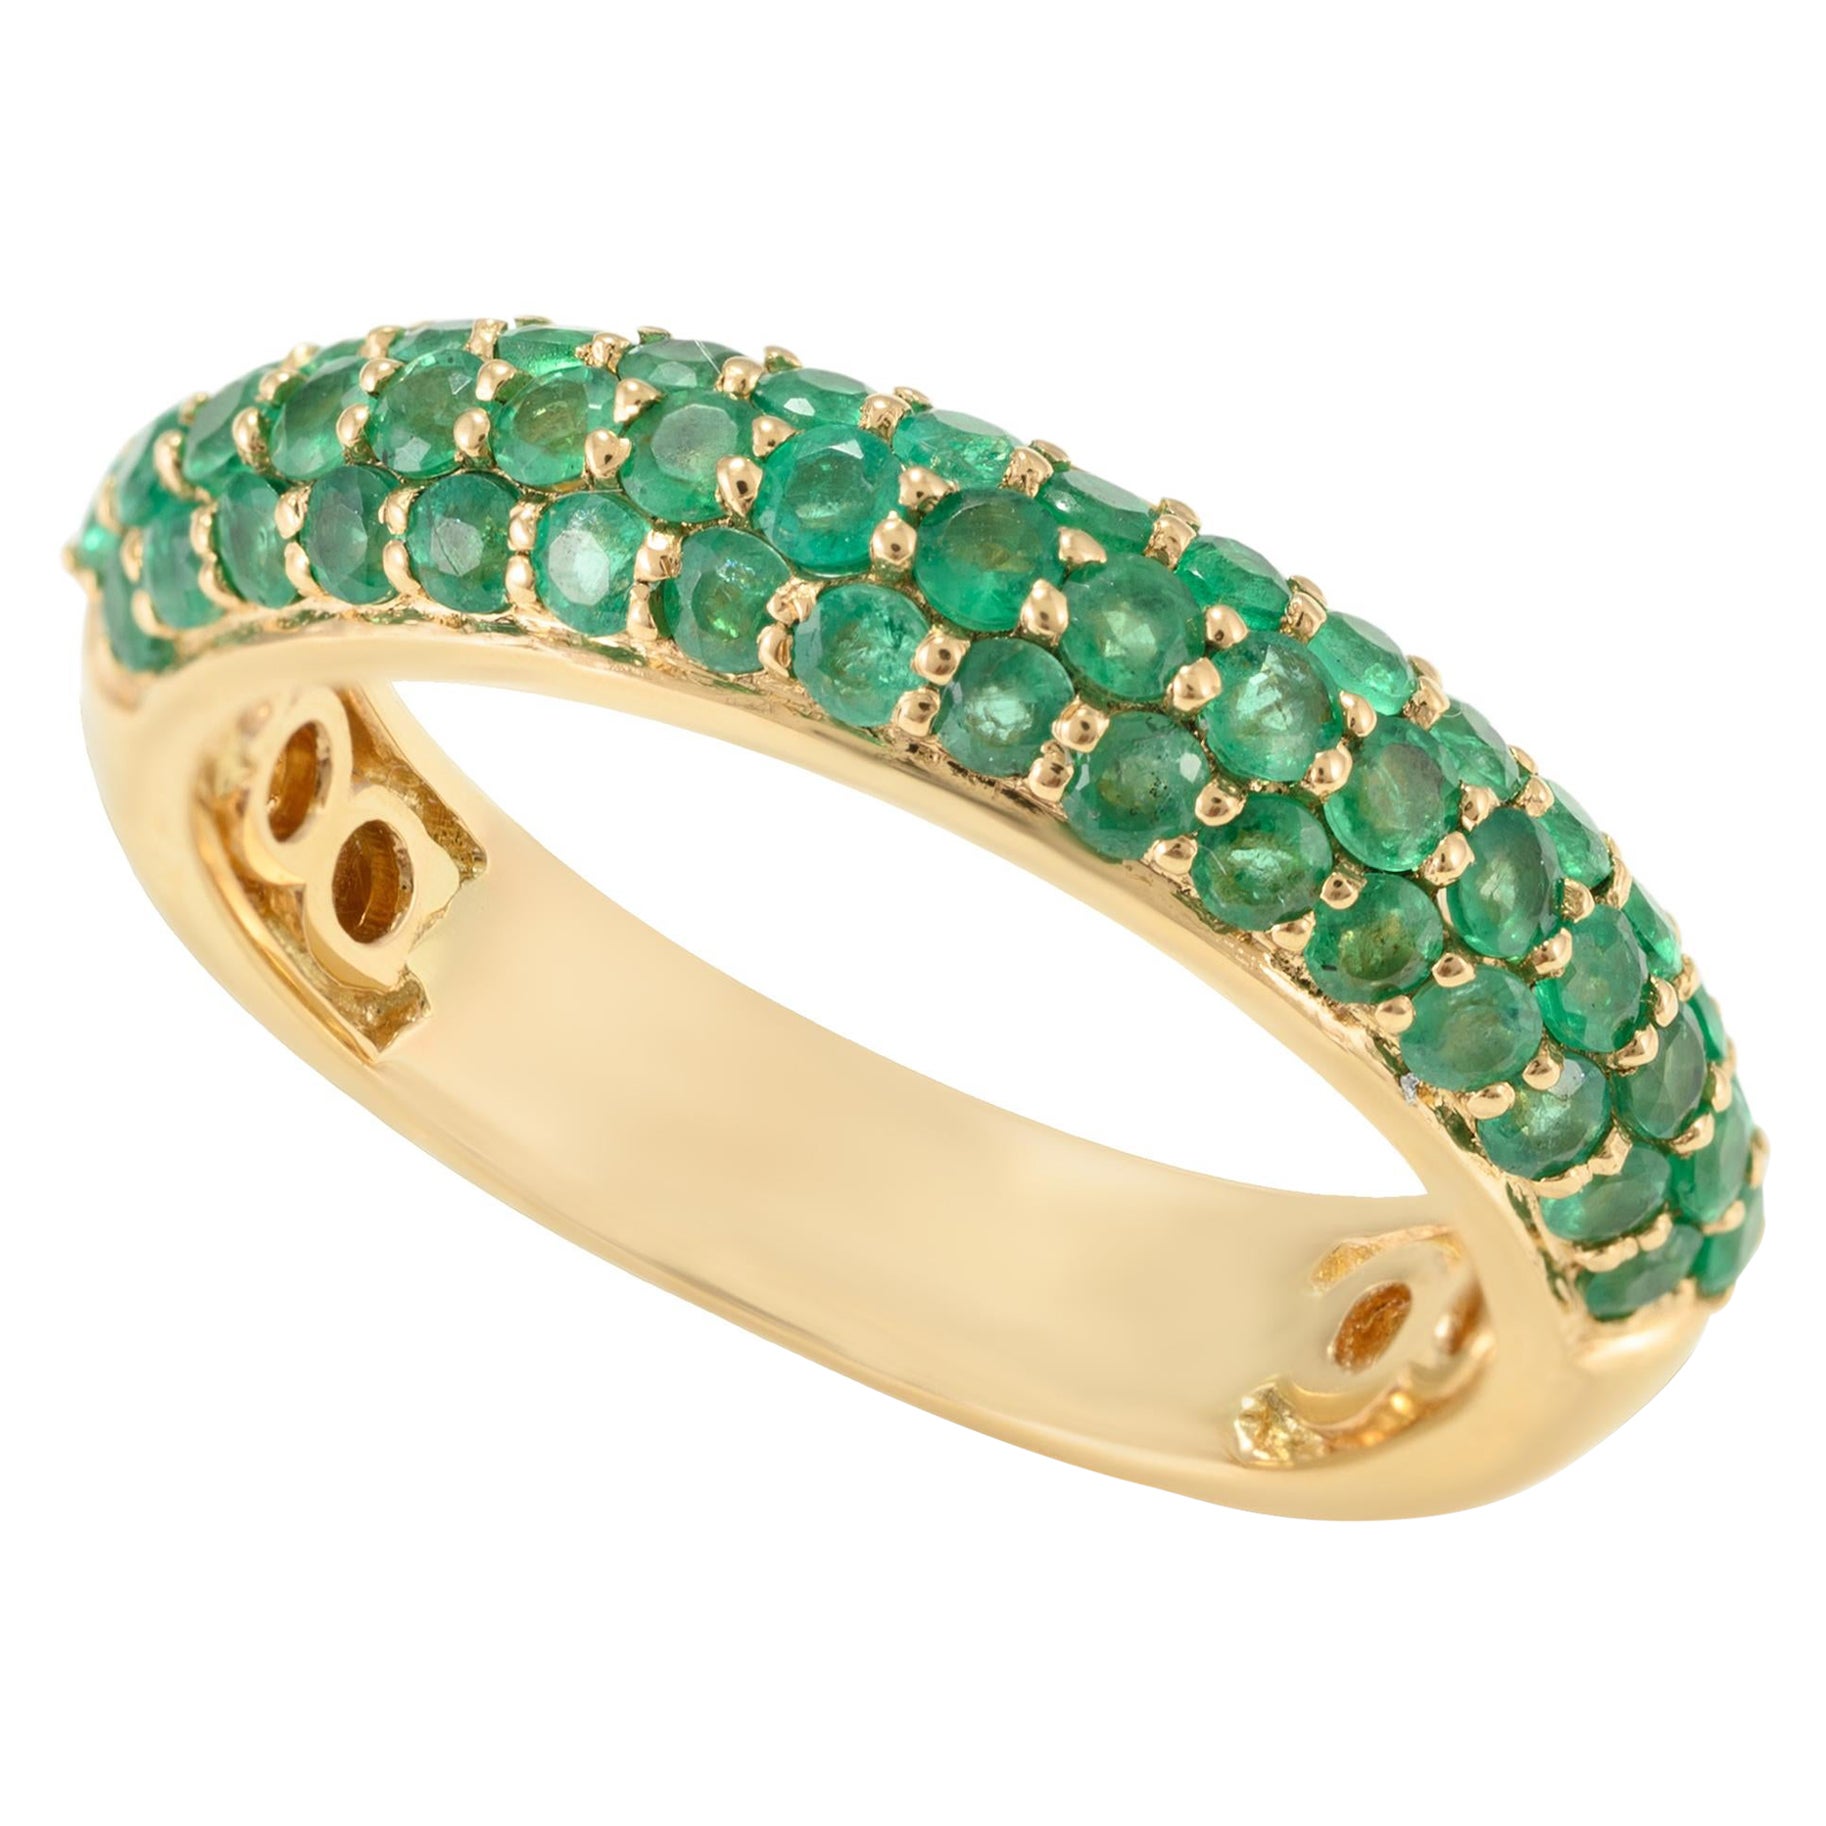 For Sale:  Natural Round Emerald Half Eternity Band Ring Studded in 18k Solid Yellow Gold